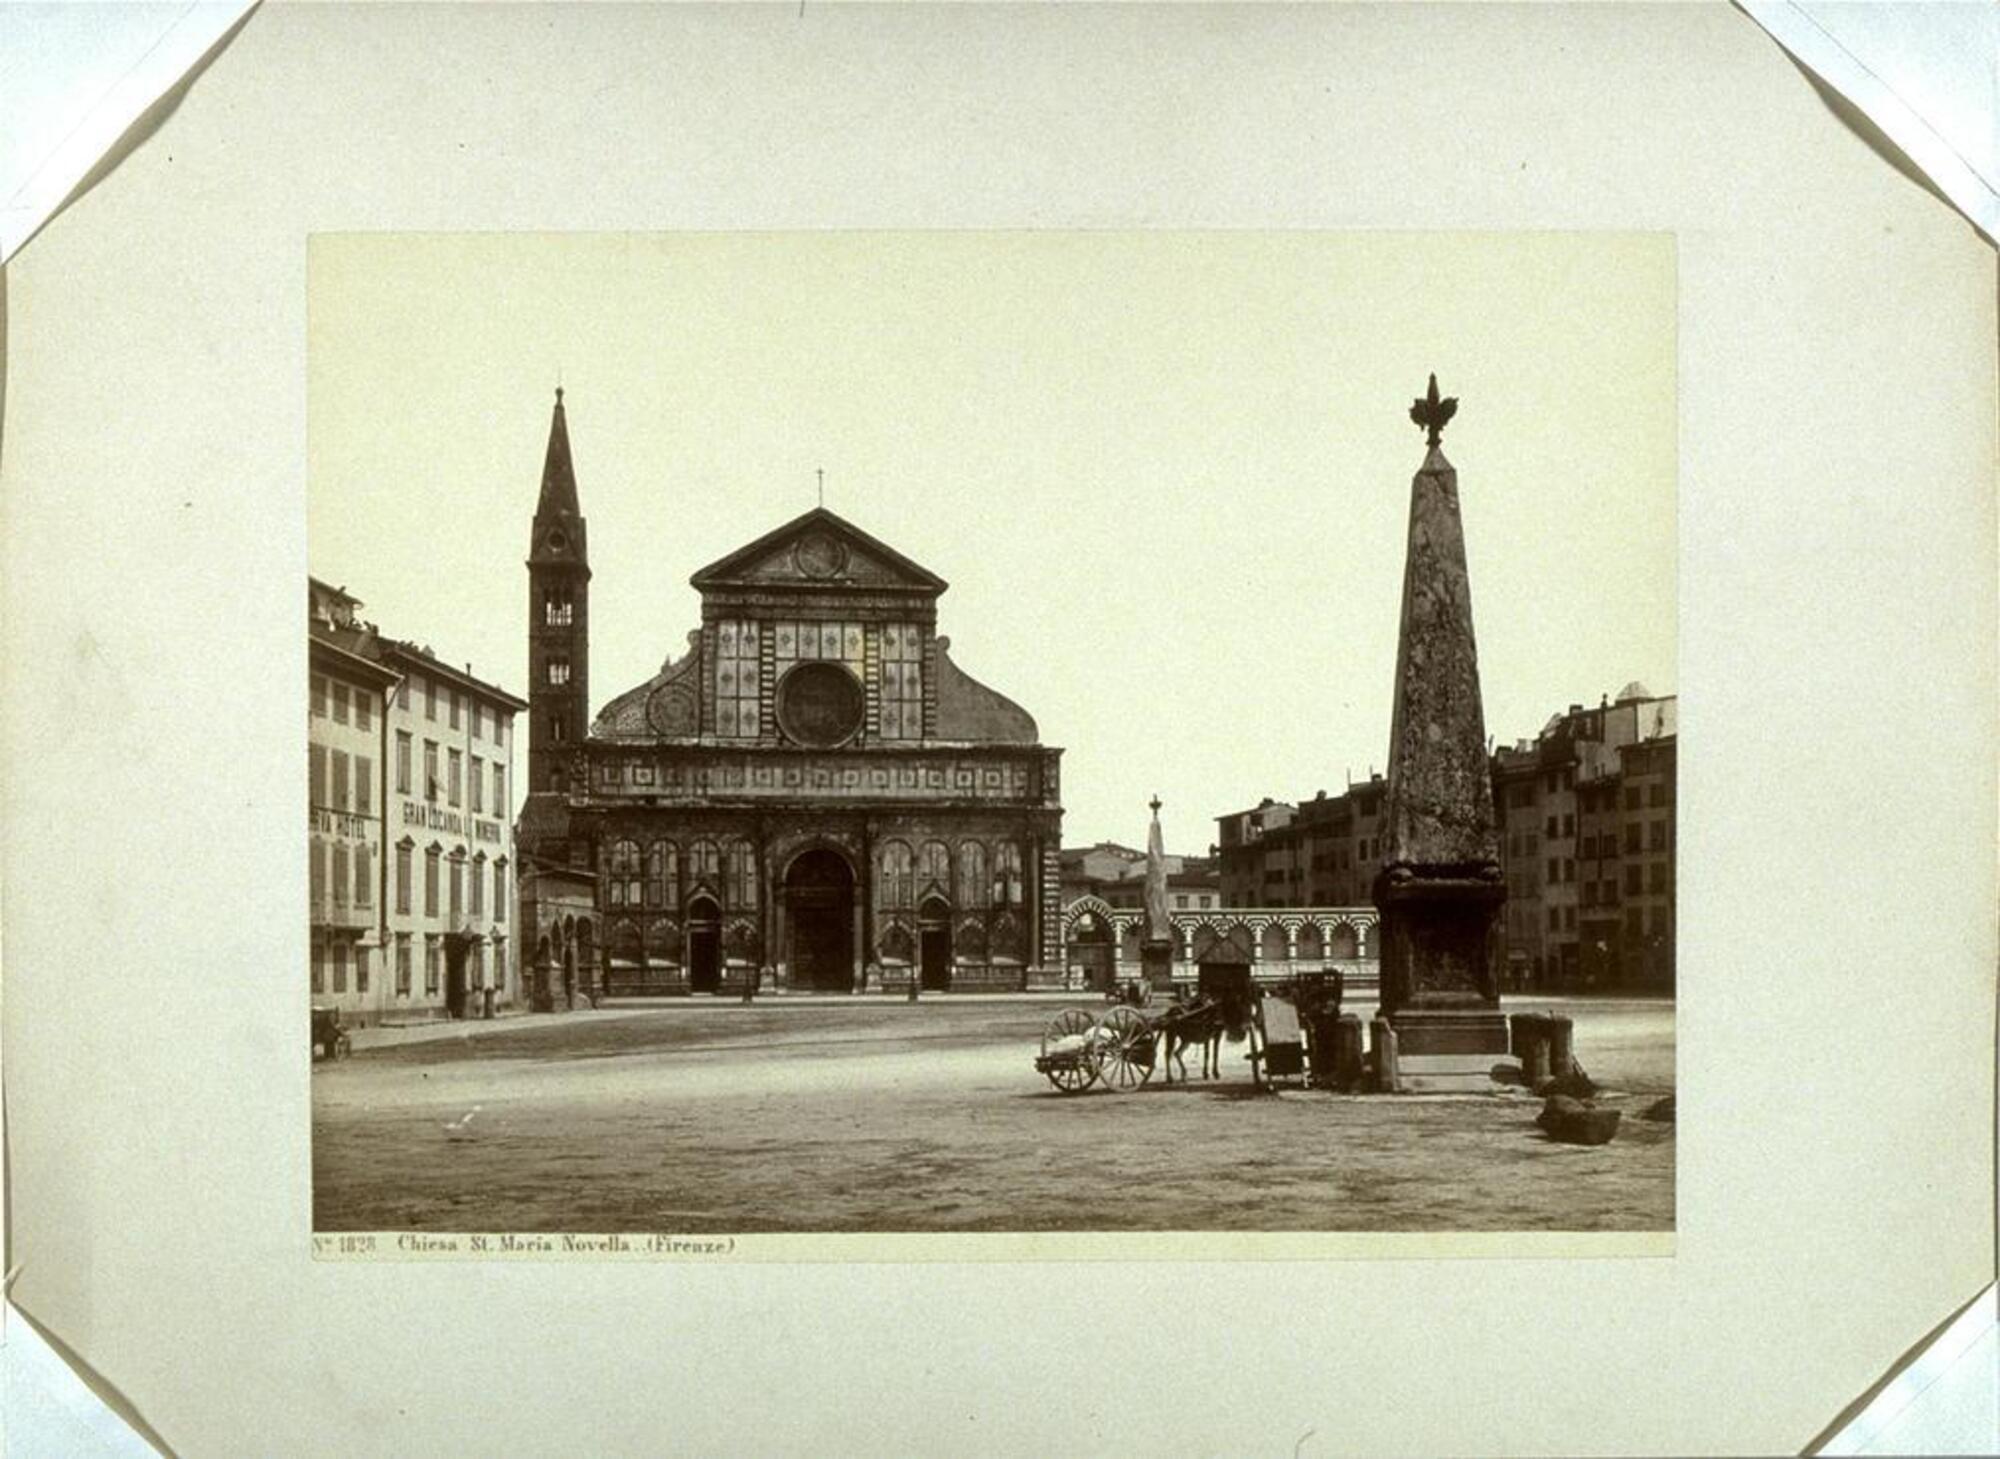 This photograph depicts a view of a church, before the church is a wide open piazza with two obelisks standing in its center. Next to one of the obelisks is a donkey cart.